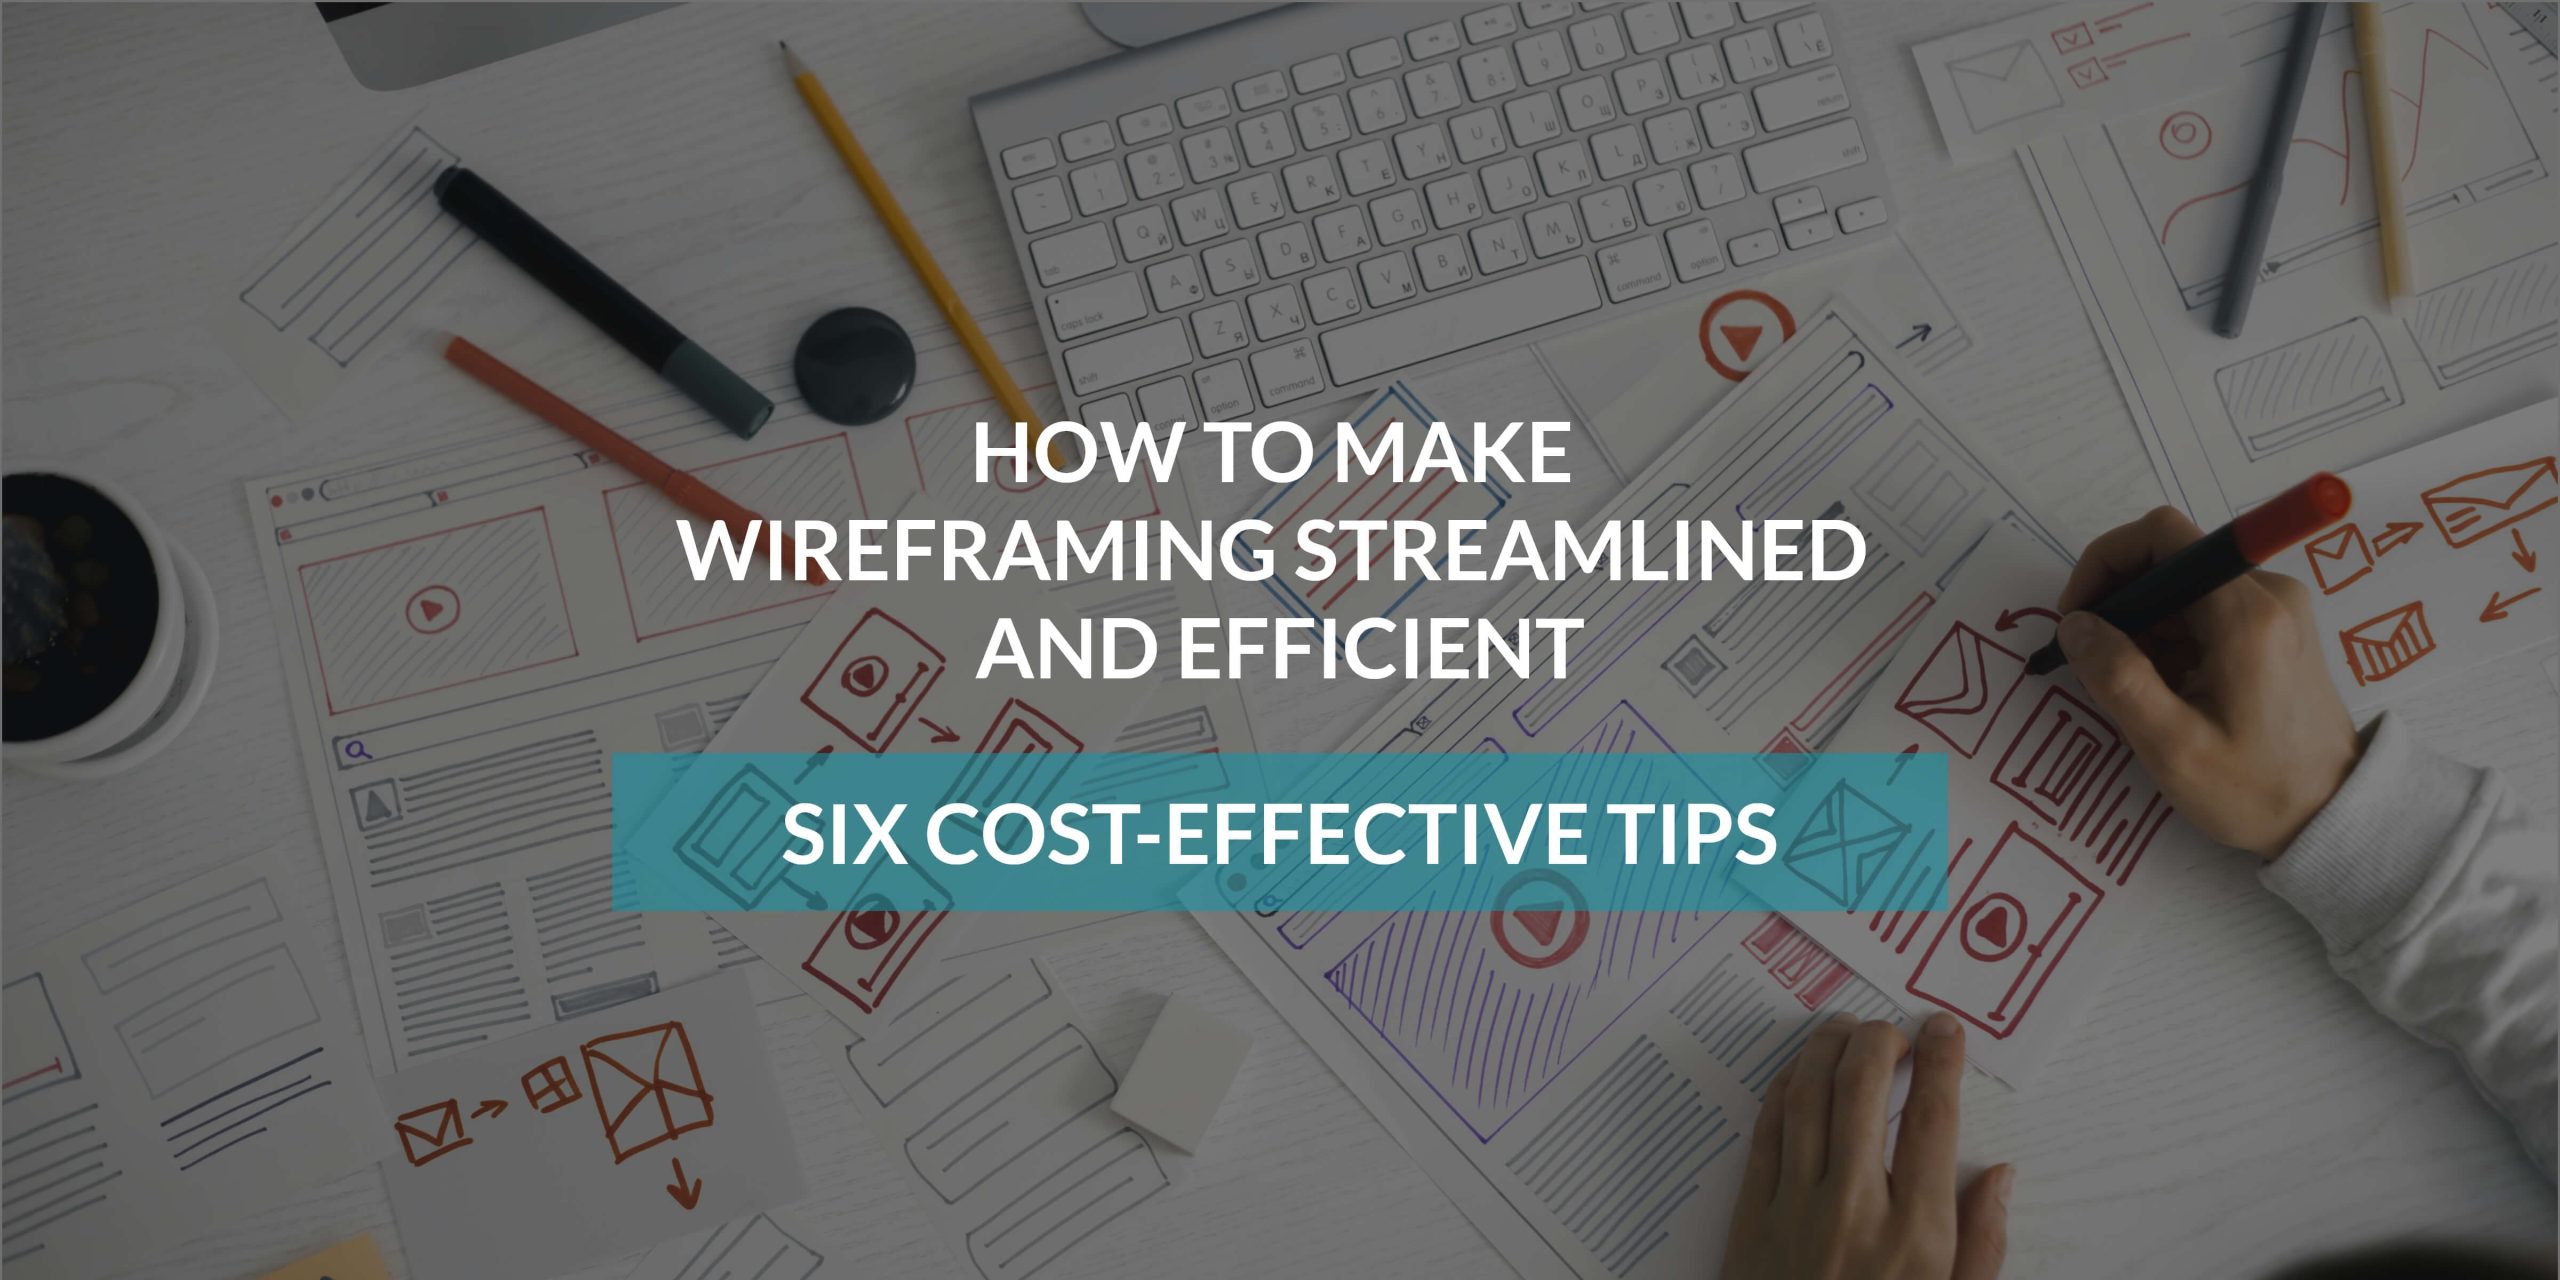 HOW TO MAKE WIREFRAMING STREAMLINED AND EFFICIENT | SIX COST-EFFECTIVE TIPS